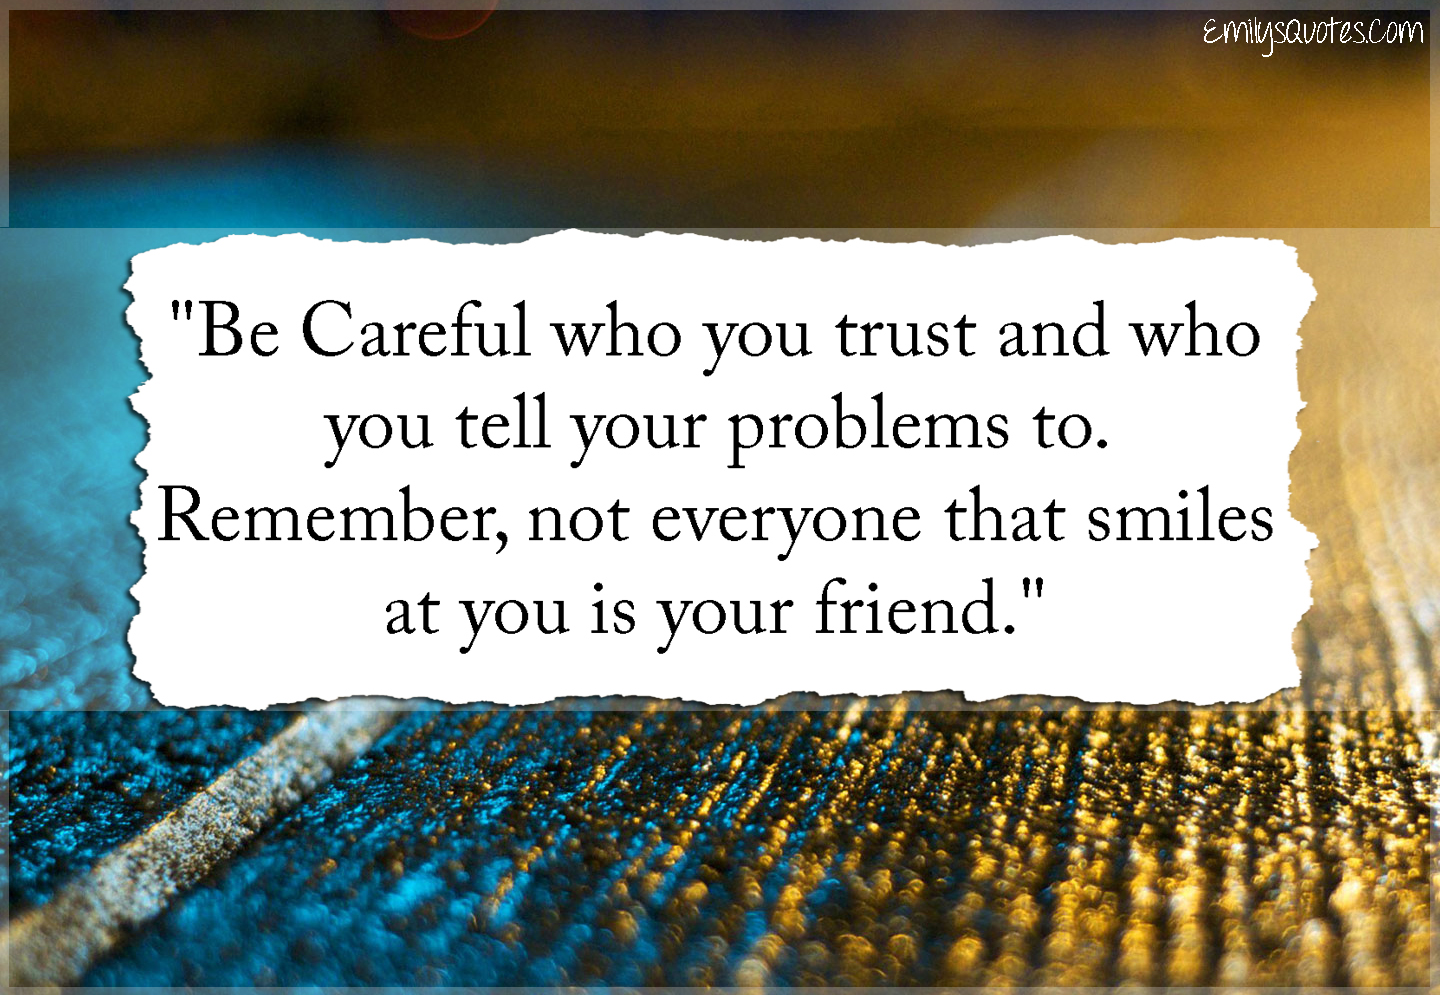 Be Careful who you trust and who you tell your problems to. Remember, not everyone that smiles at you is your friend